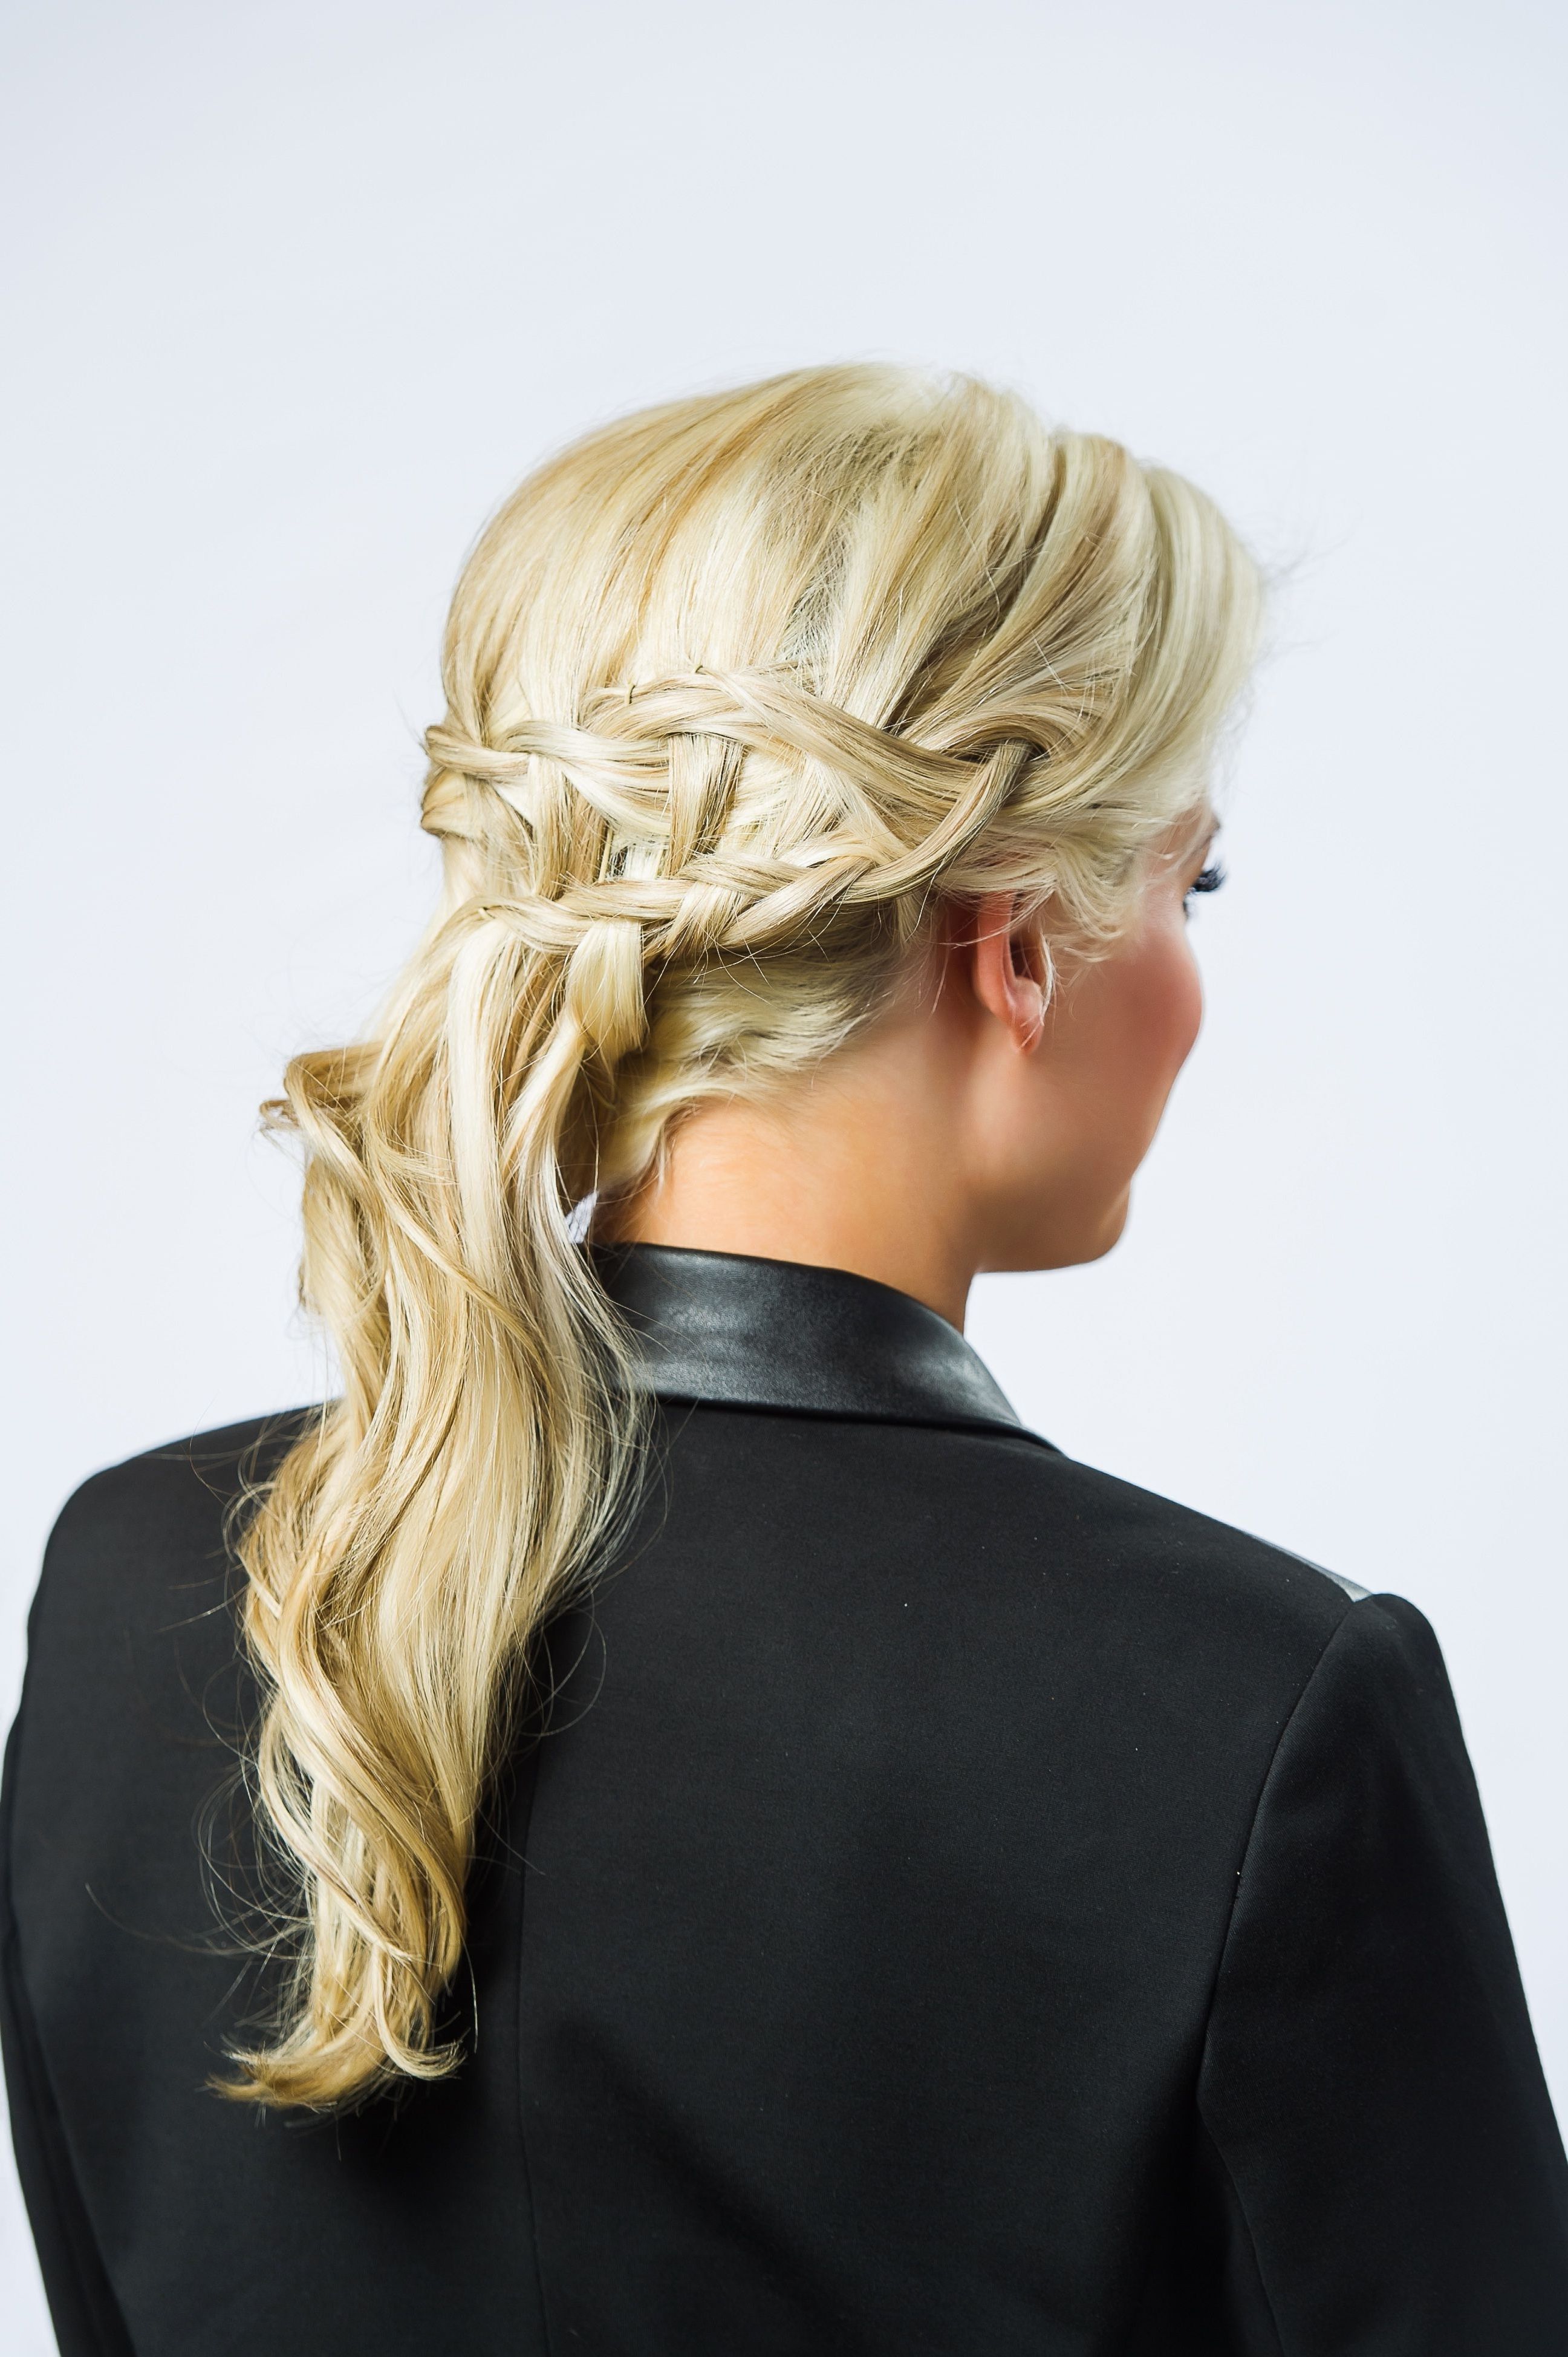 Hair Creations Pertaining To Latest Blonde Ponytails With Double Braid (View 12 of 20)